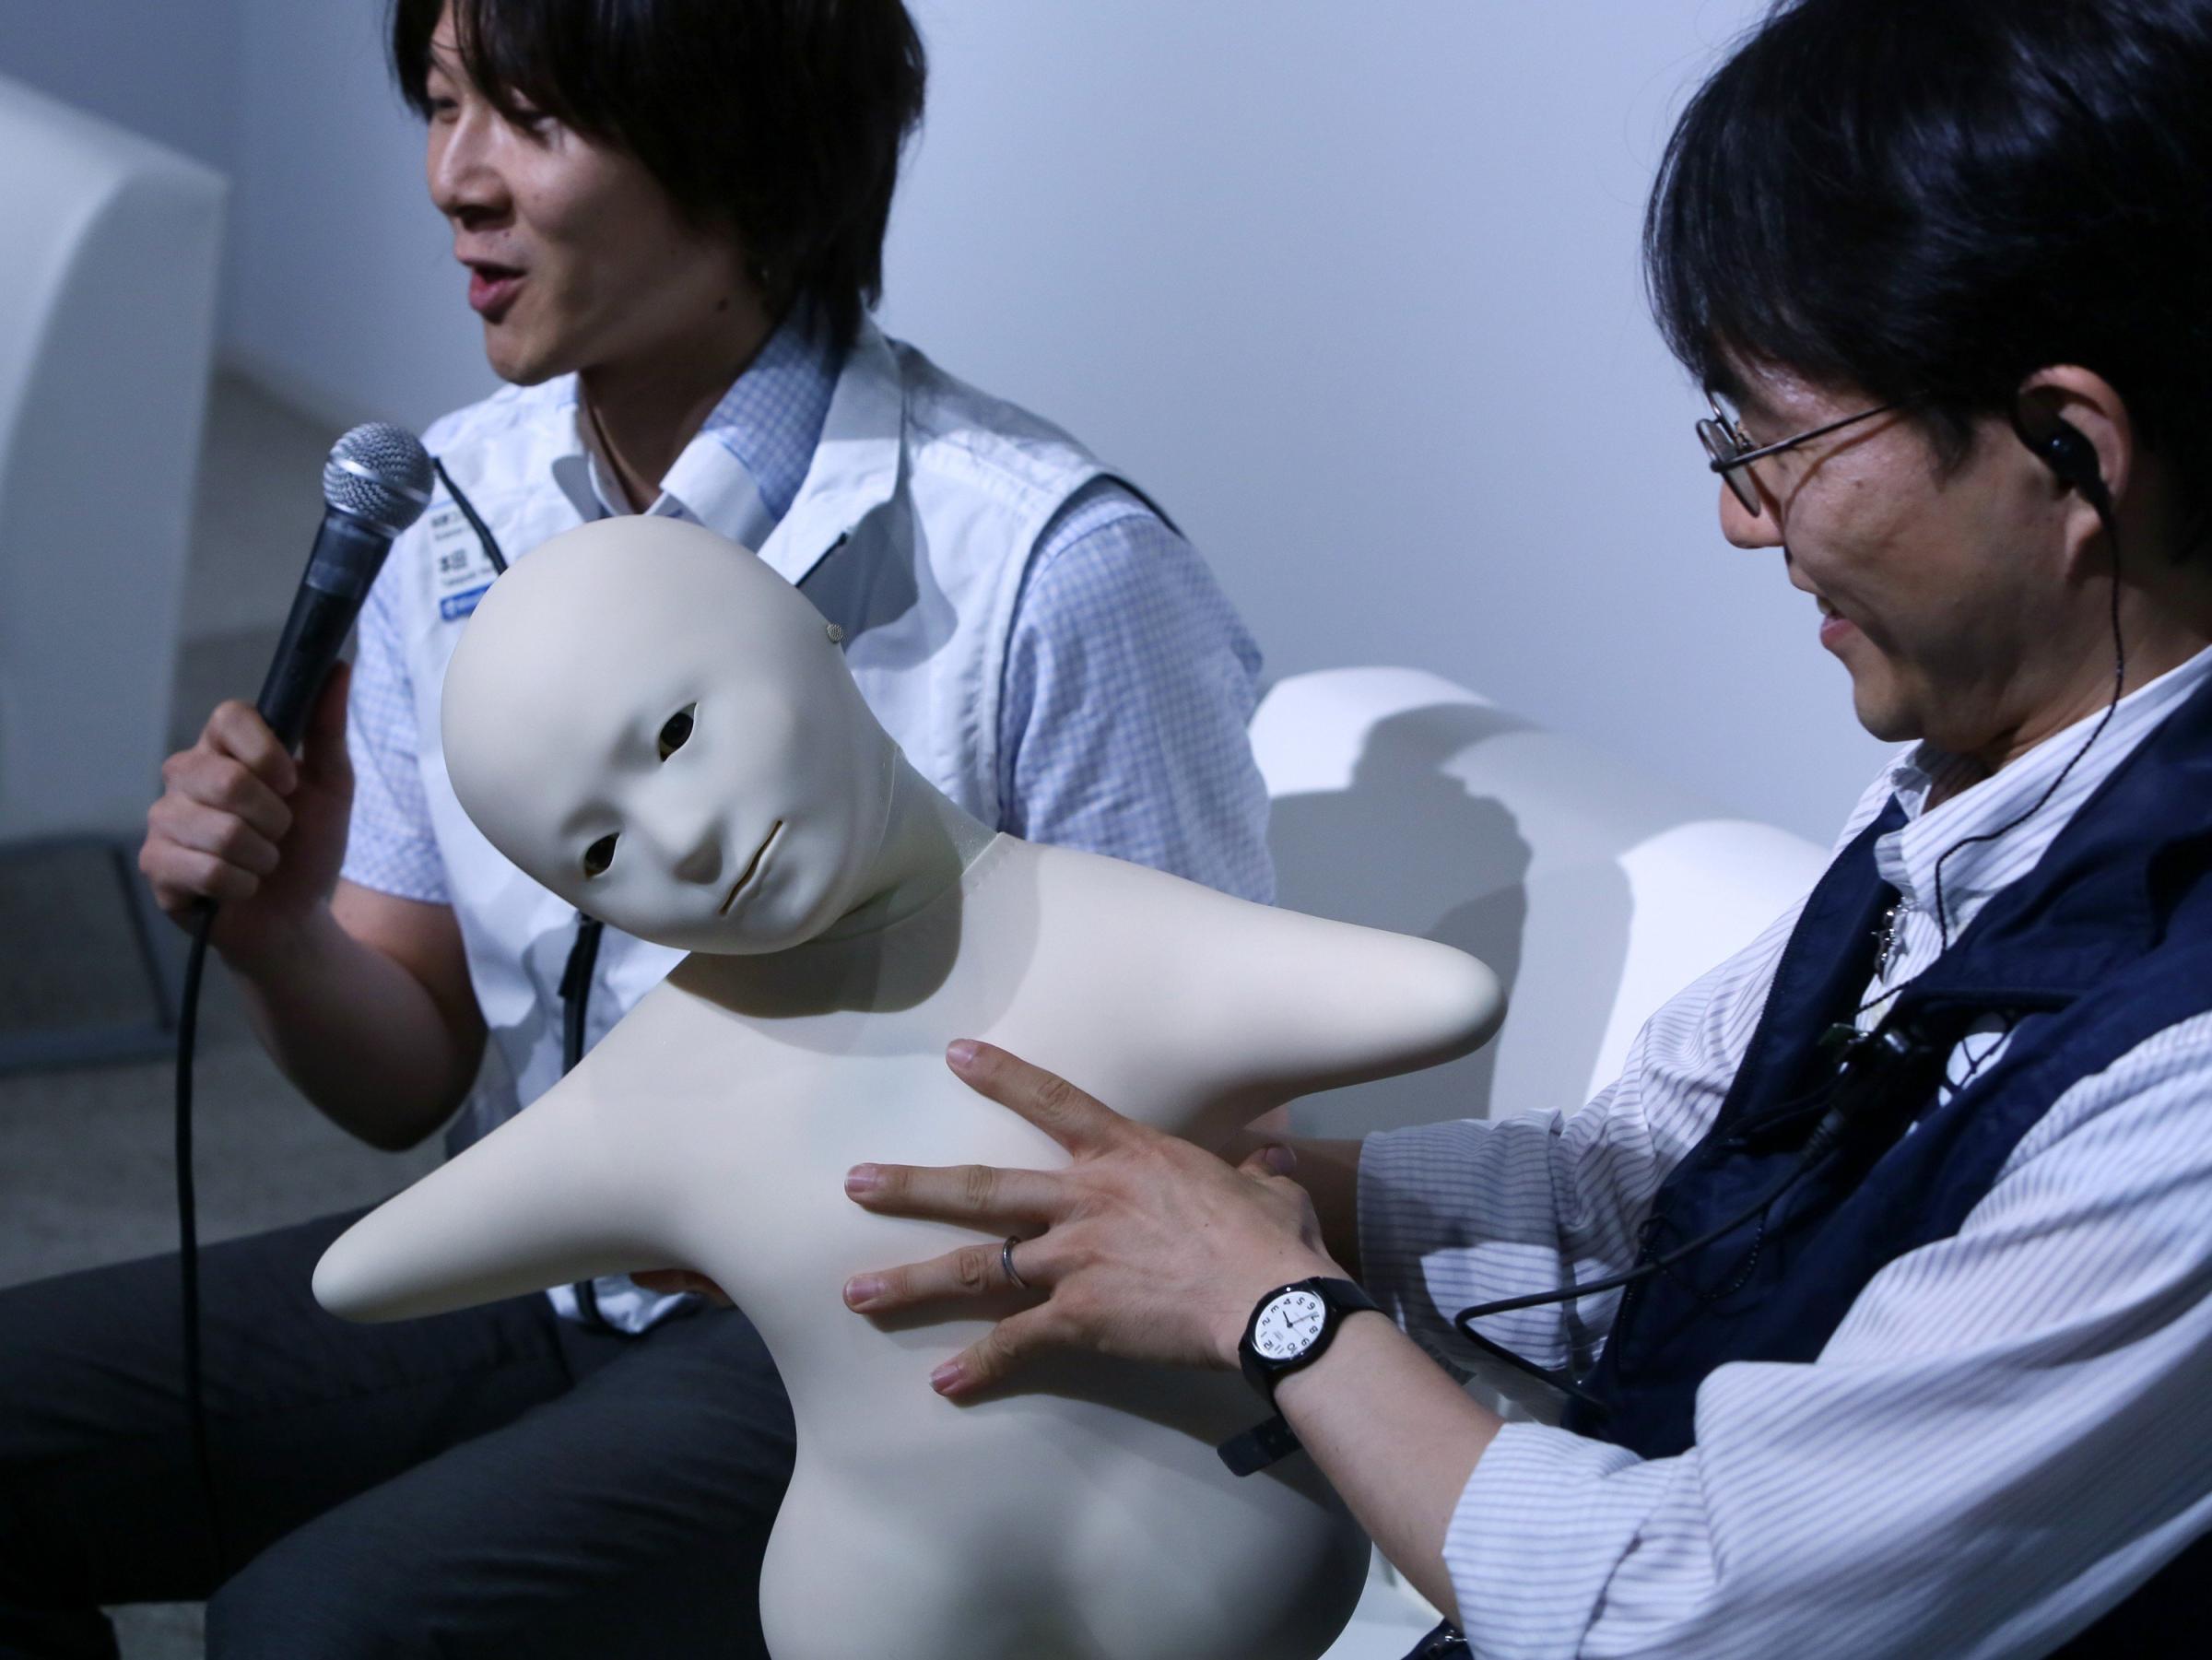 Telenoid is a teleoperated android robot with a minimal design, created as an attempt to embody the minimum physical requirements for humanlike communication during a press preview at the National Museum of Emerging Science and Innovation Miraikan in Tokyo on June 24, 2014.